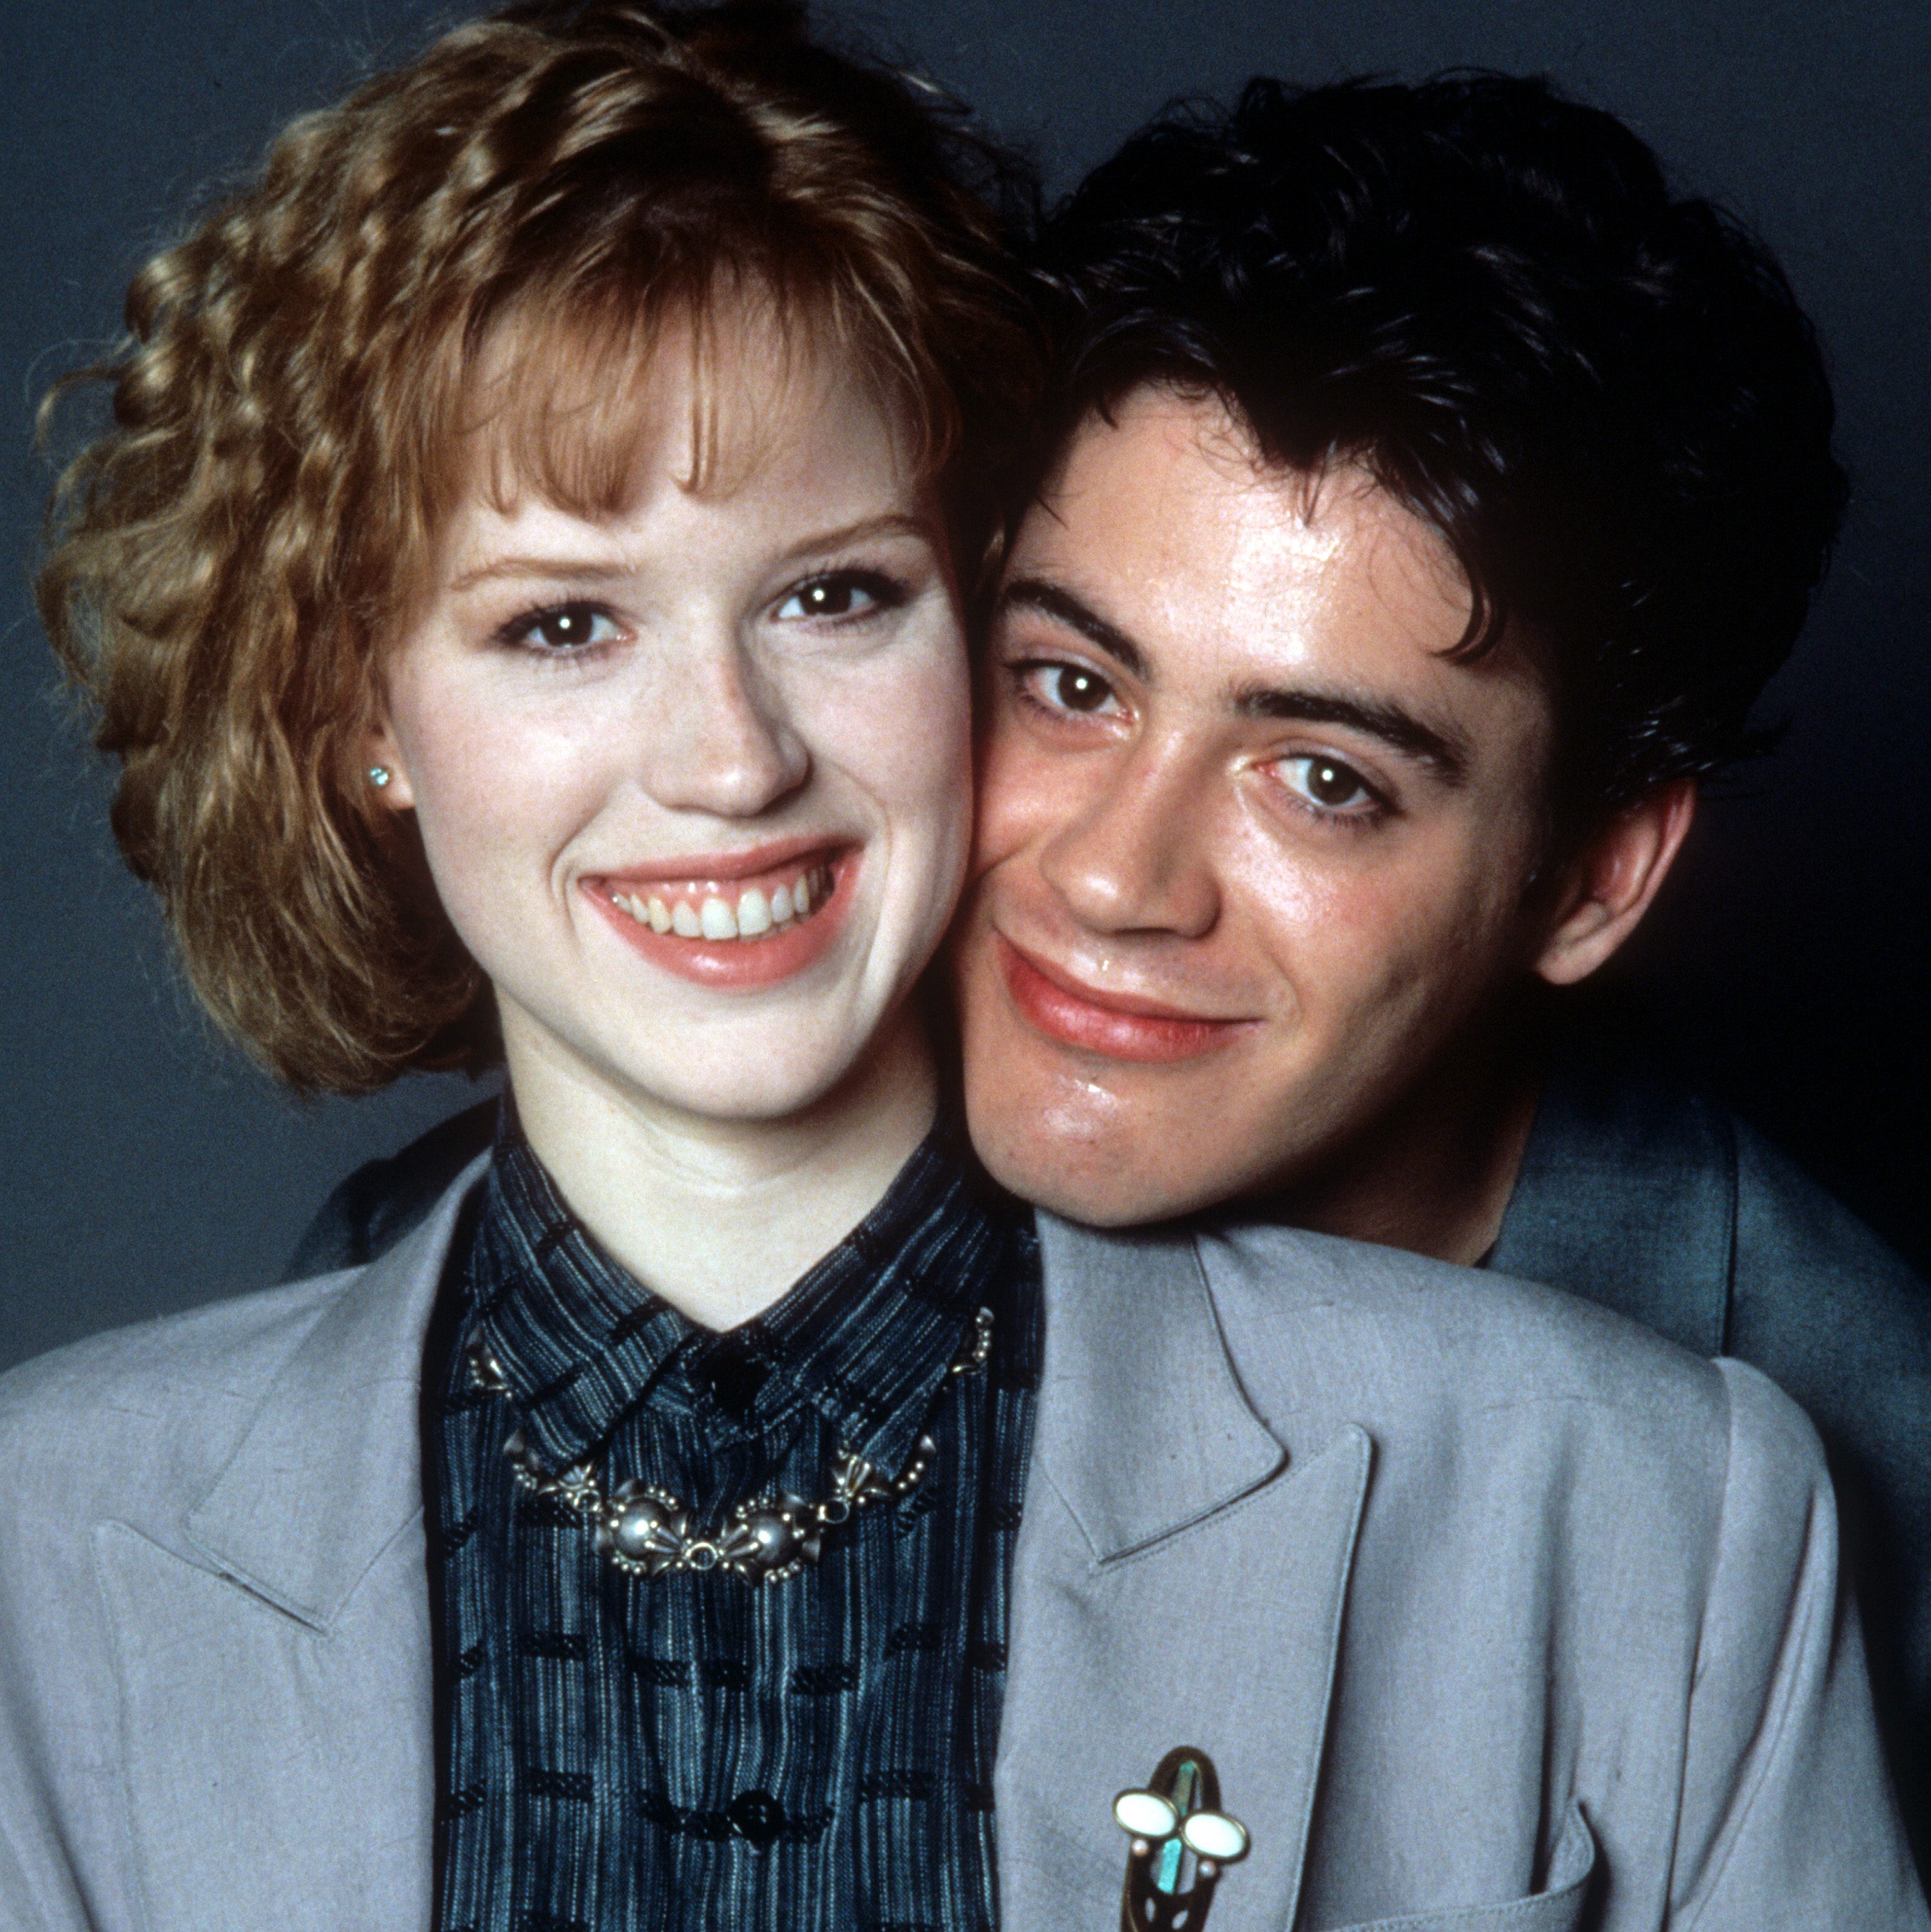 Molly Ringwald and Robert Downey Jr in publicity portrait for The Pick-Up Artist, 1987